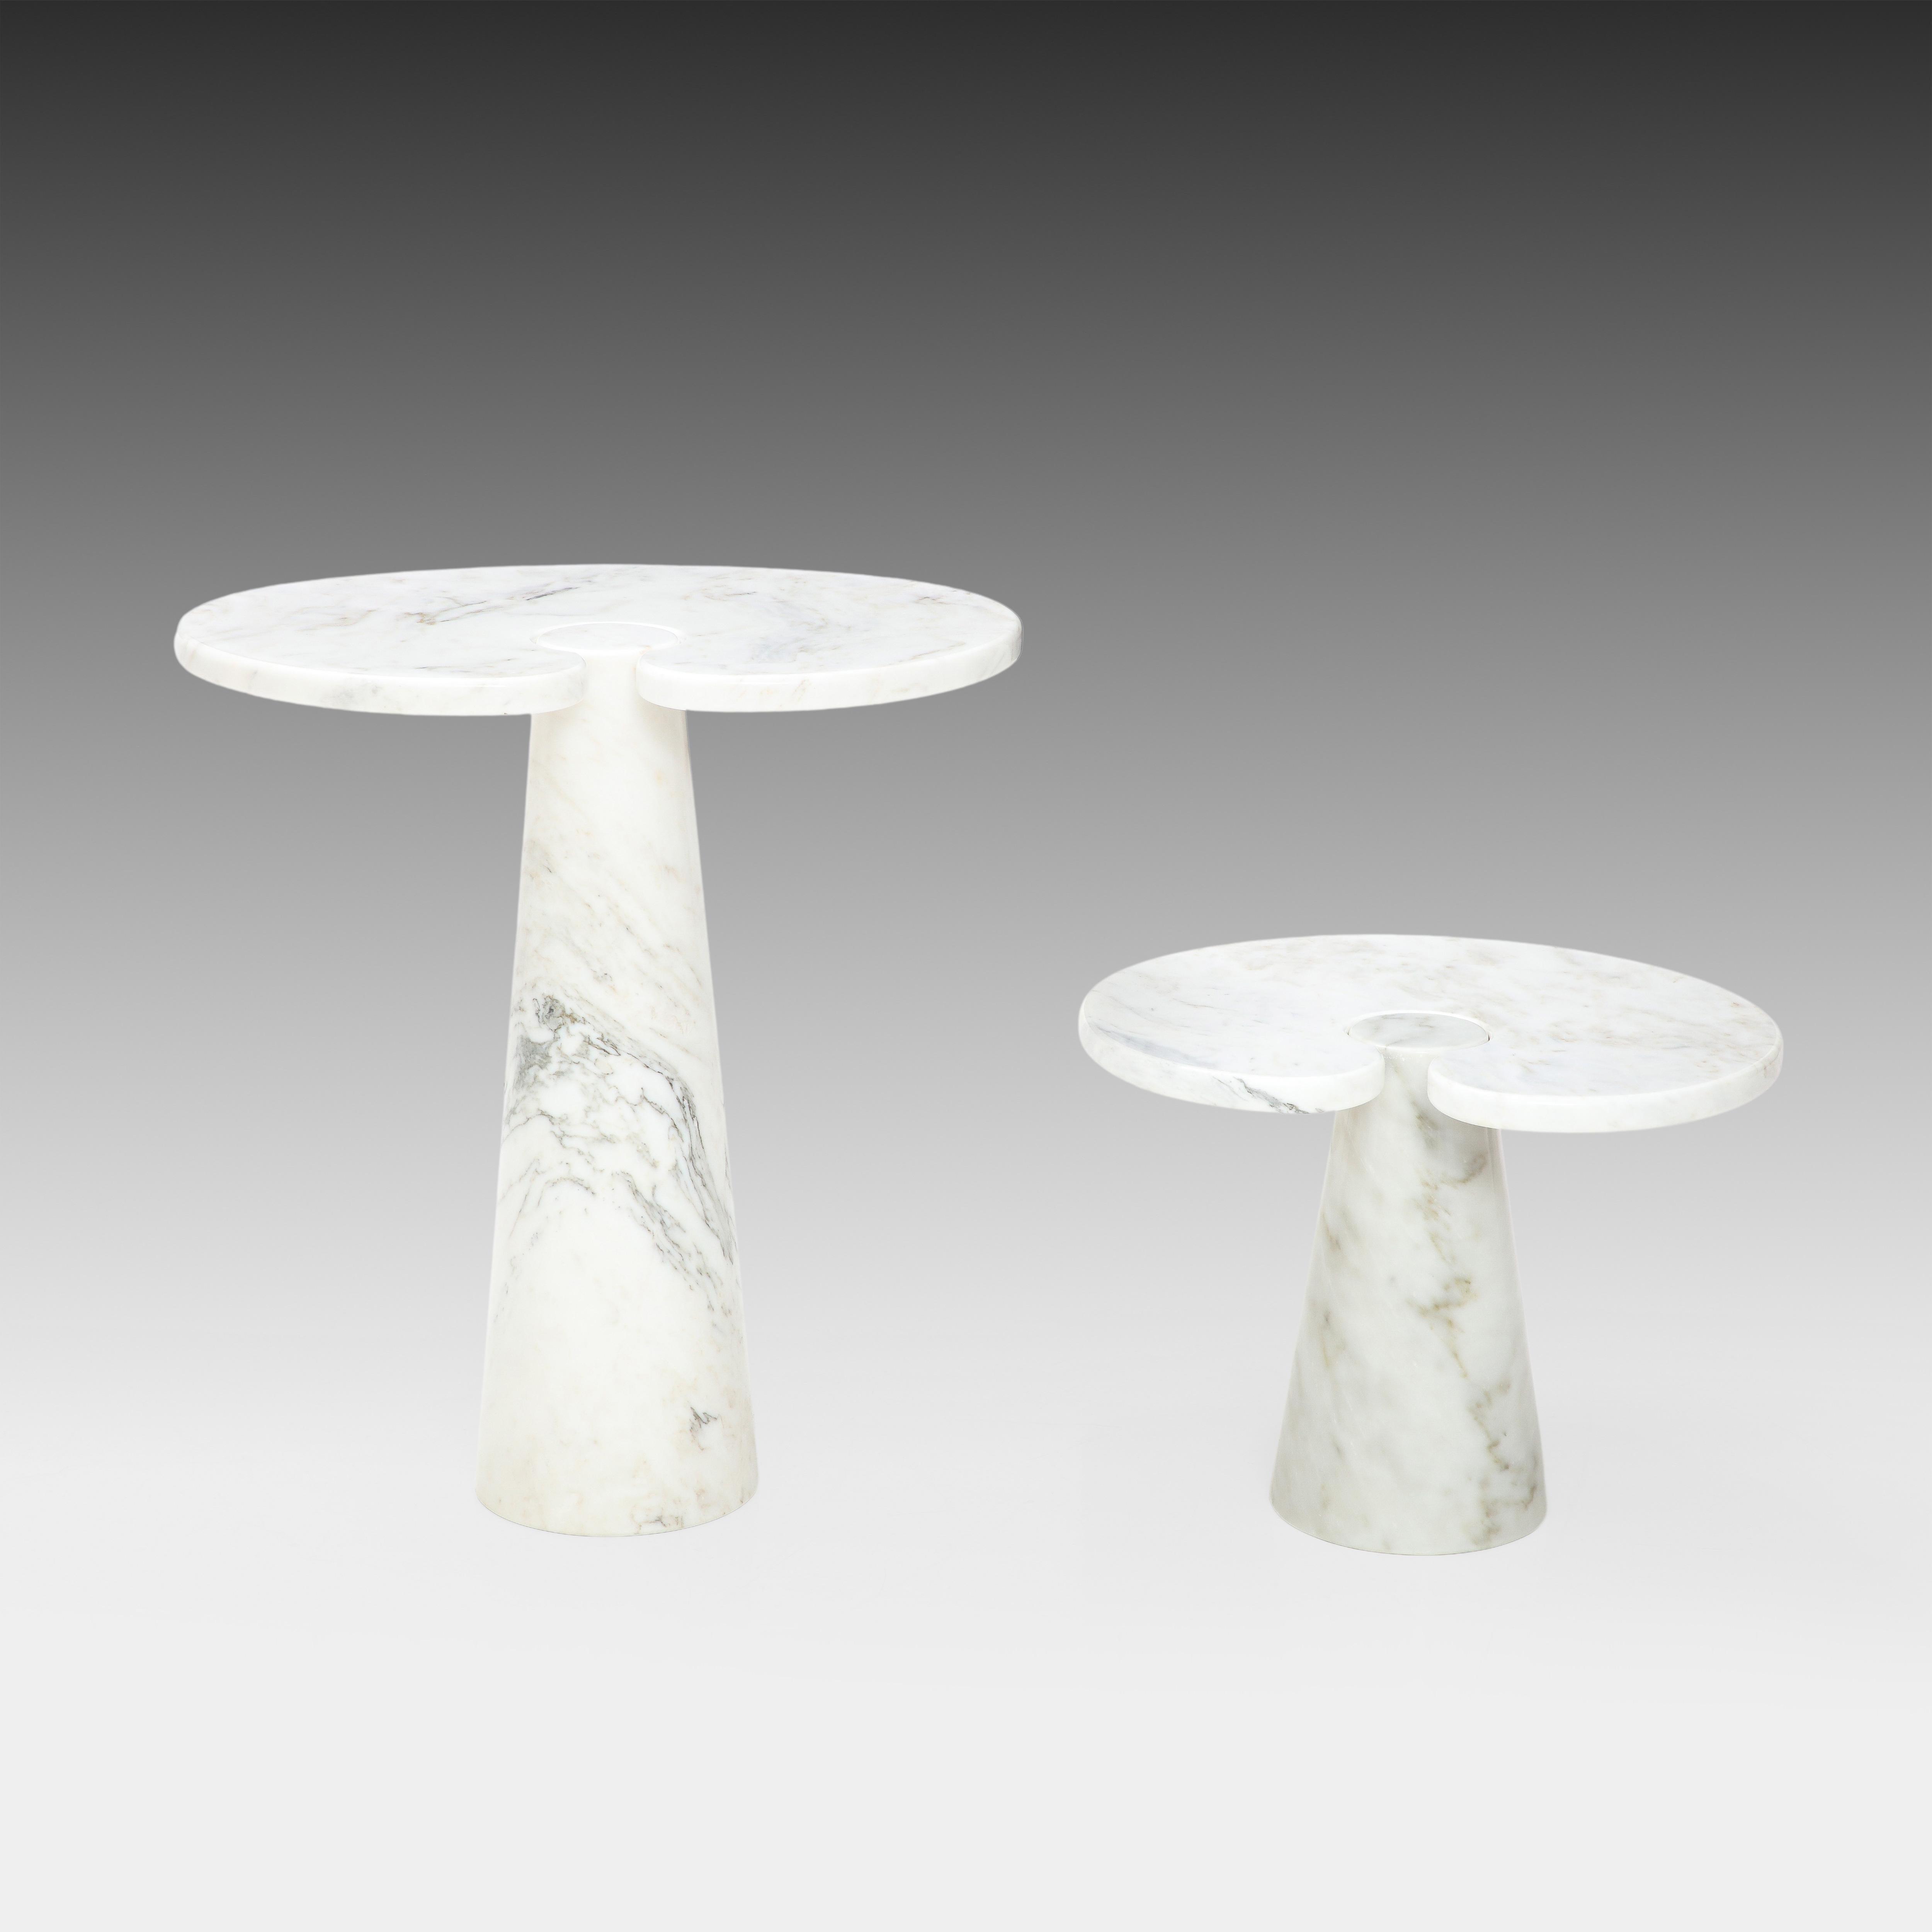 Angelo Mangiarotti Carrara Marble Side Table from 'Eros' Series, 1971 For Sale 5